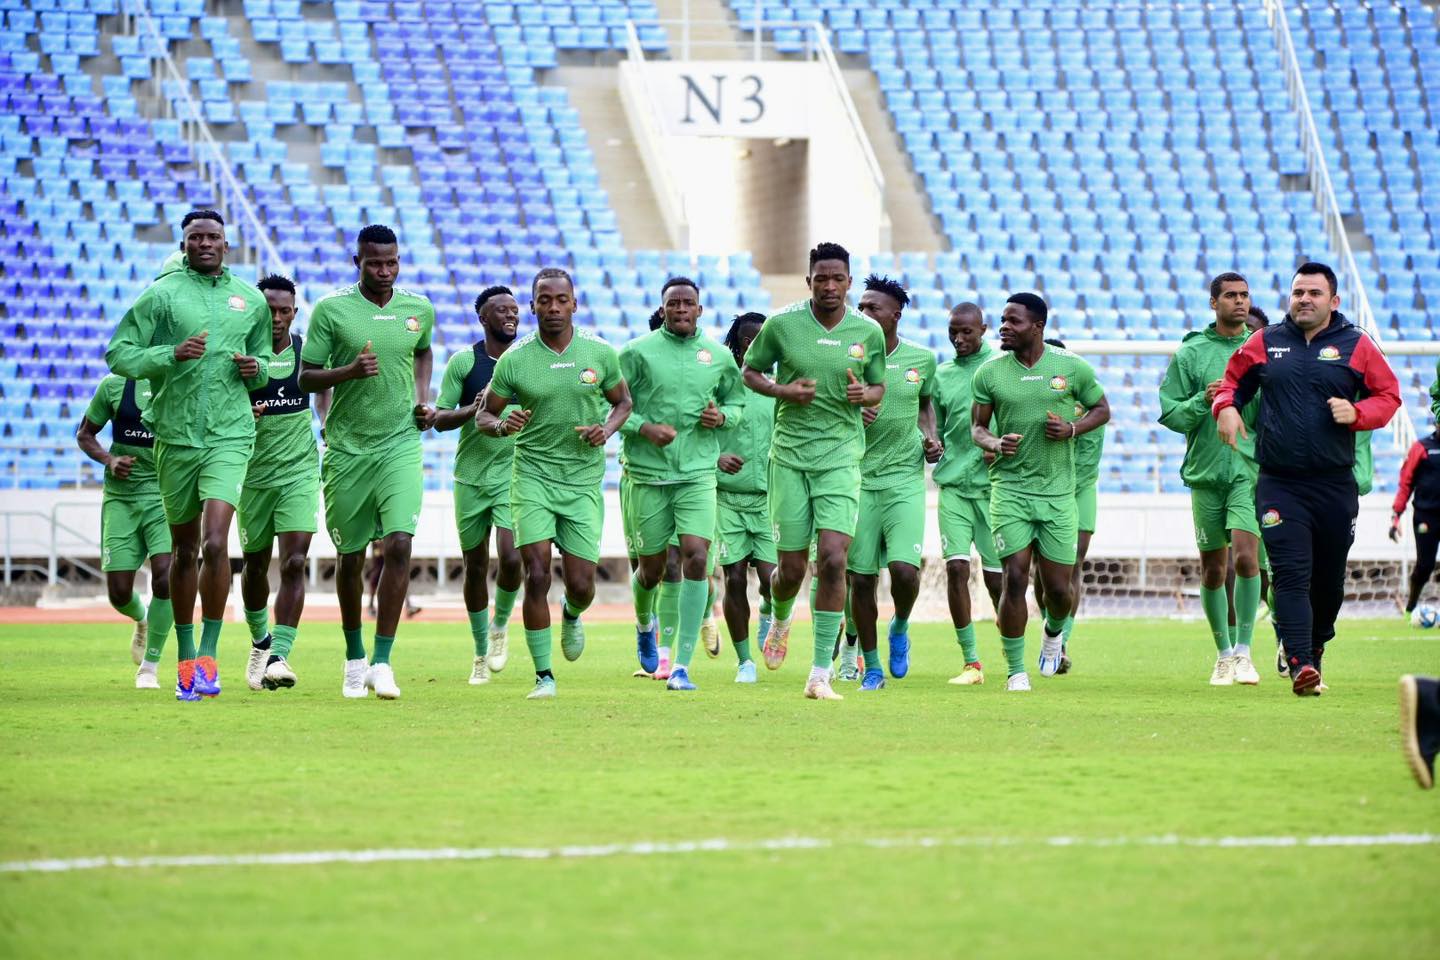 Kenya faces daunting task against unbeaten Ivory Coast in crucial World Cup qualifier